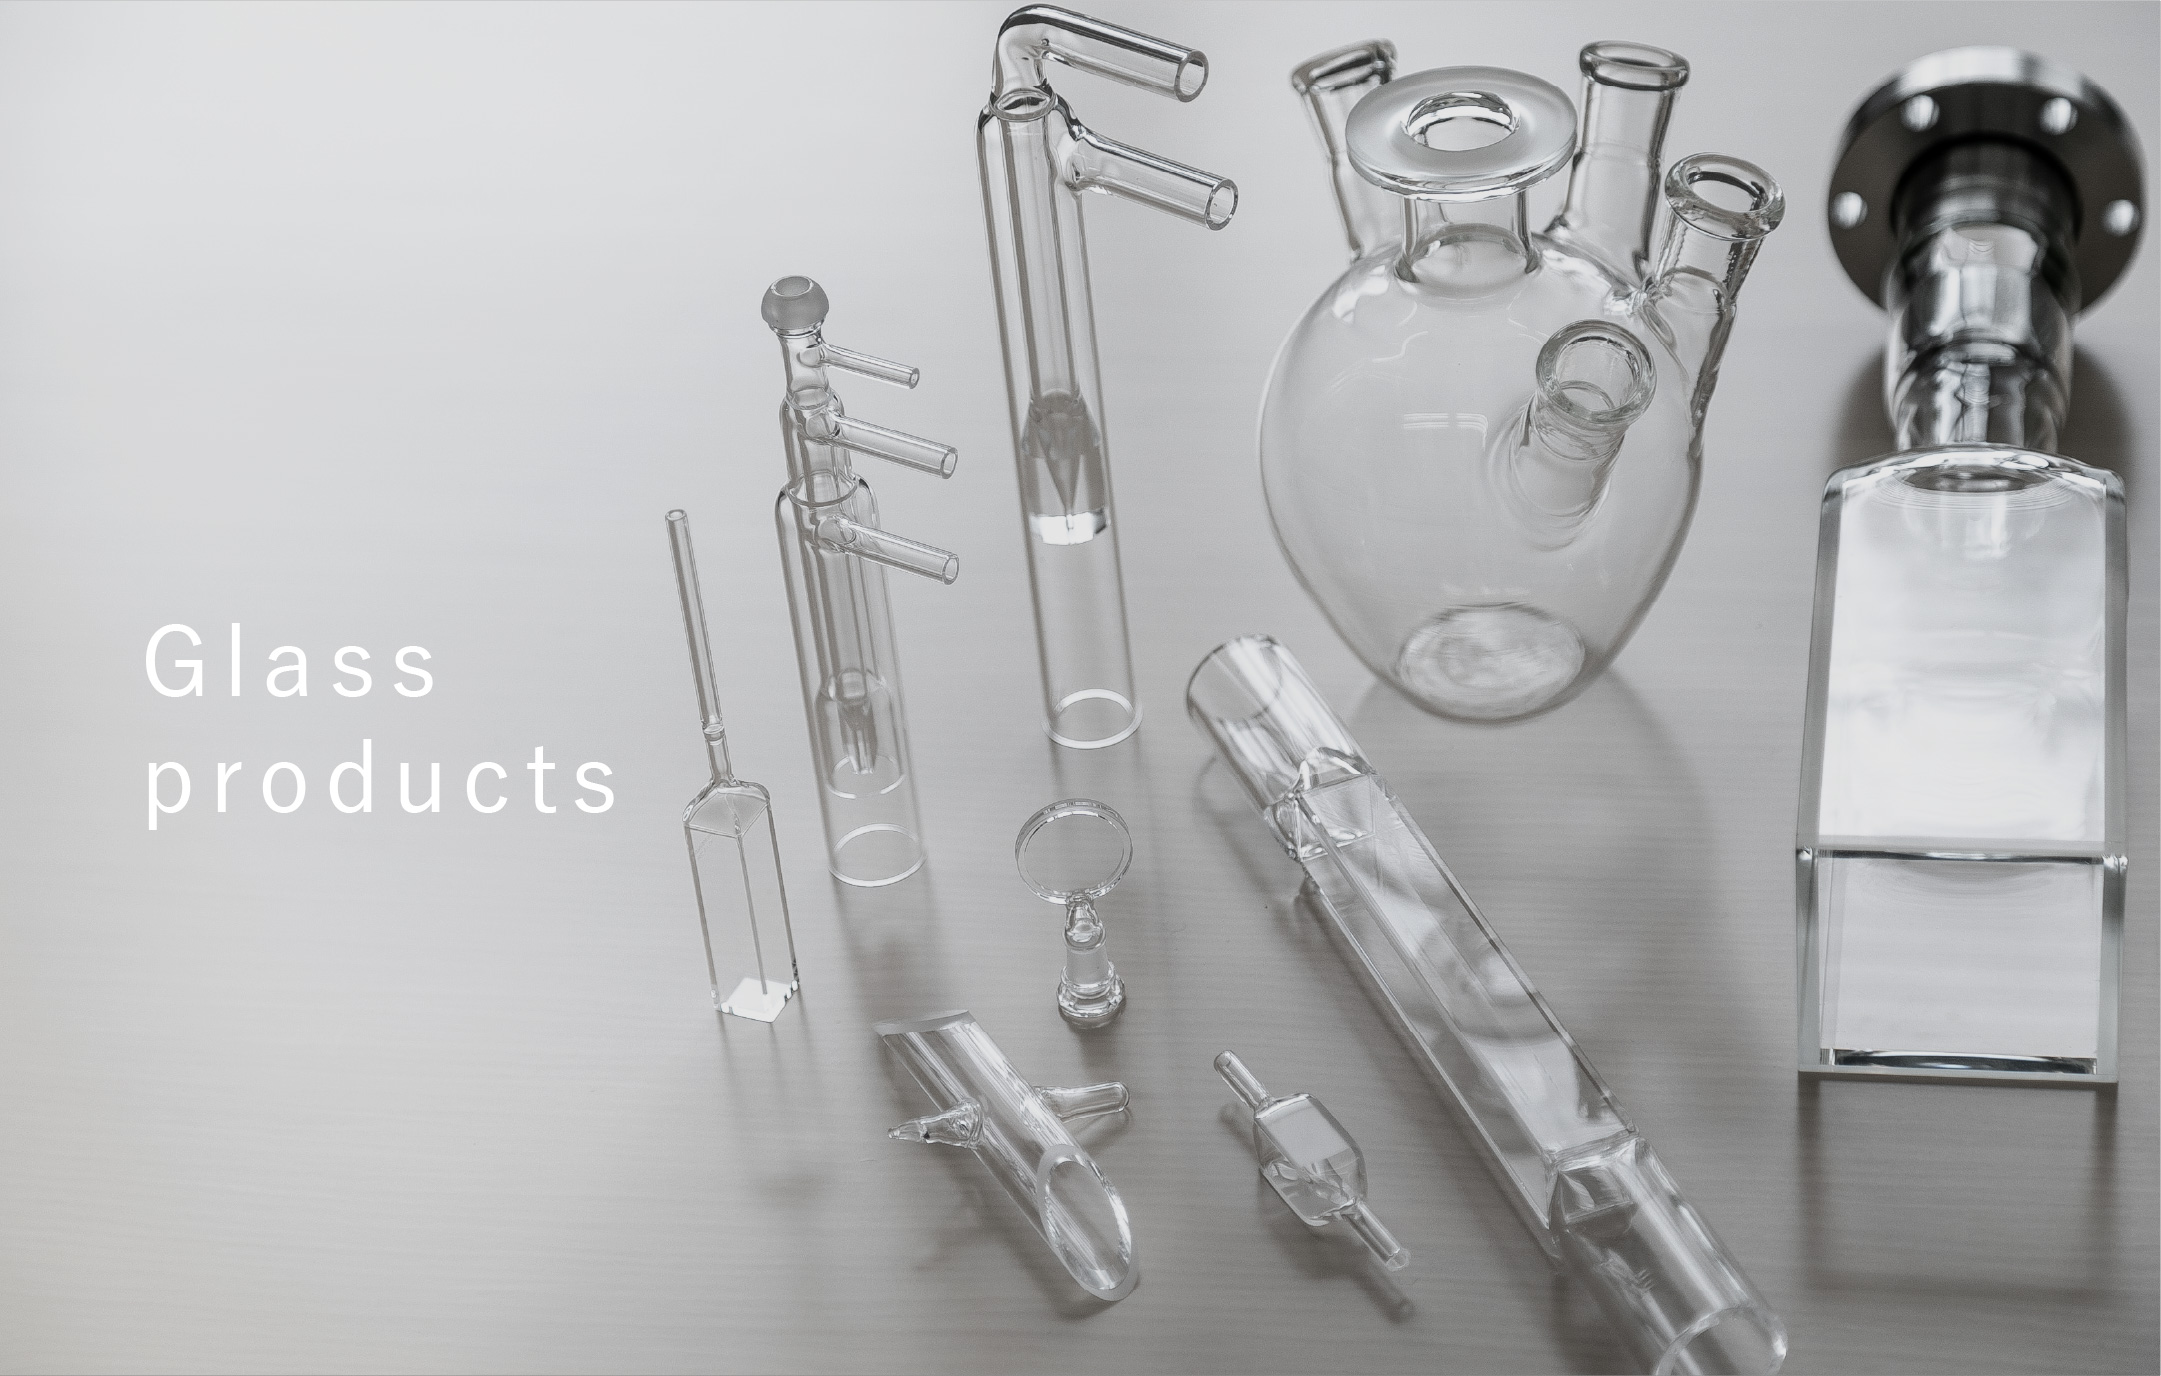 Glass products